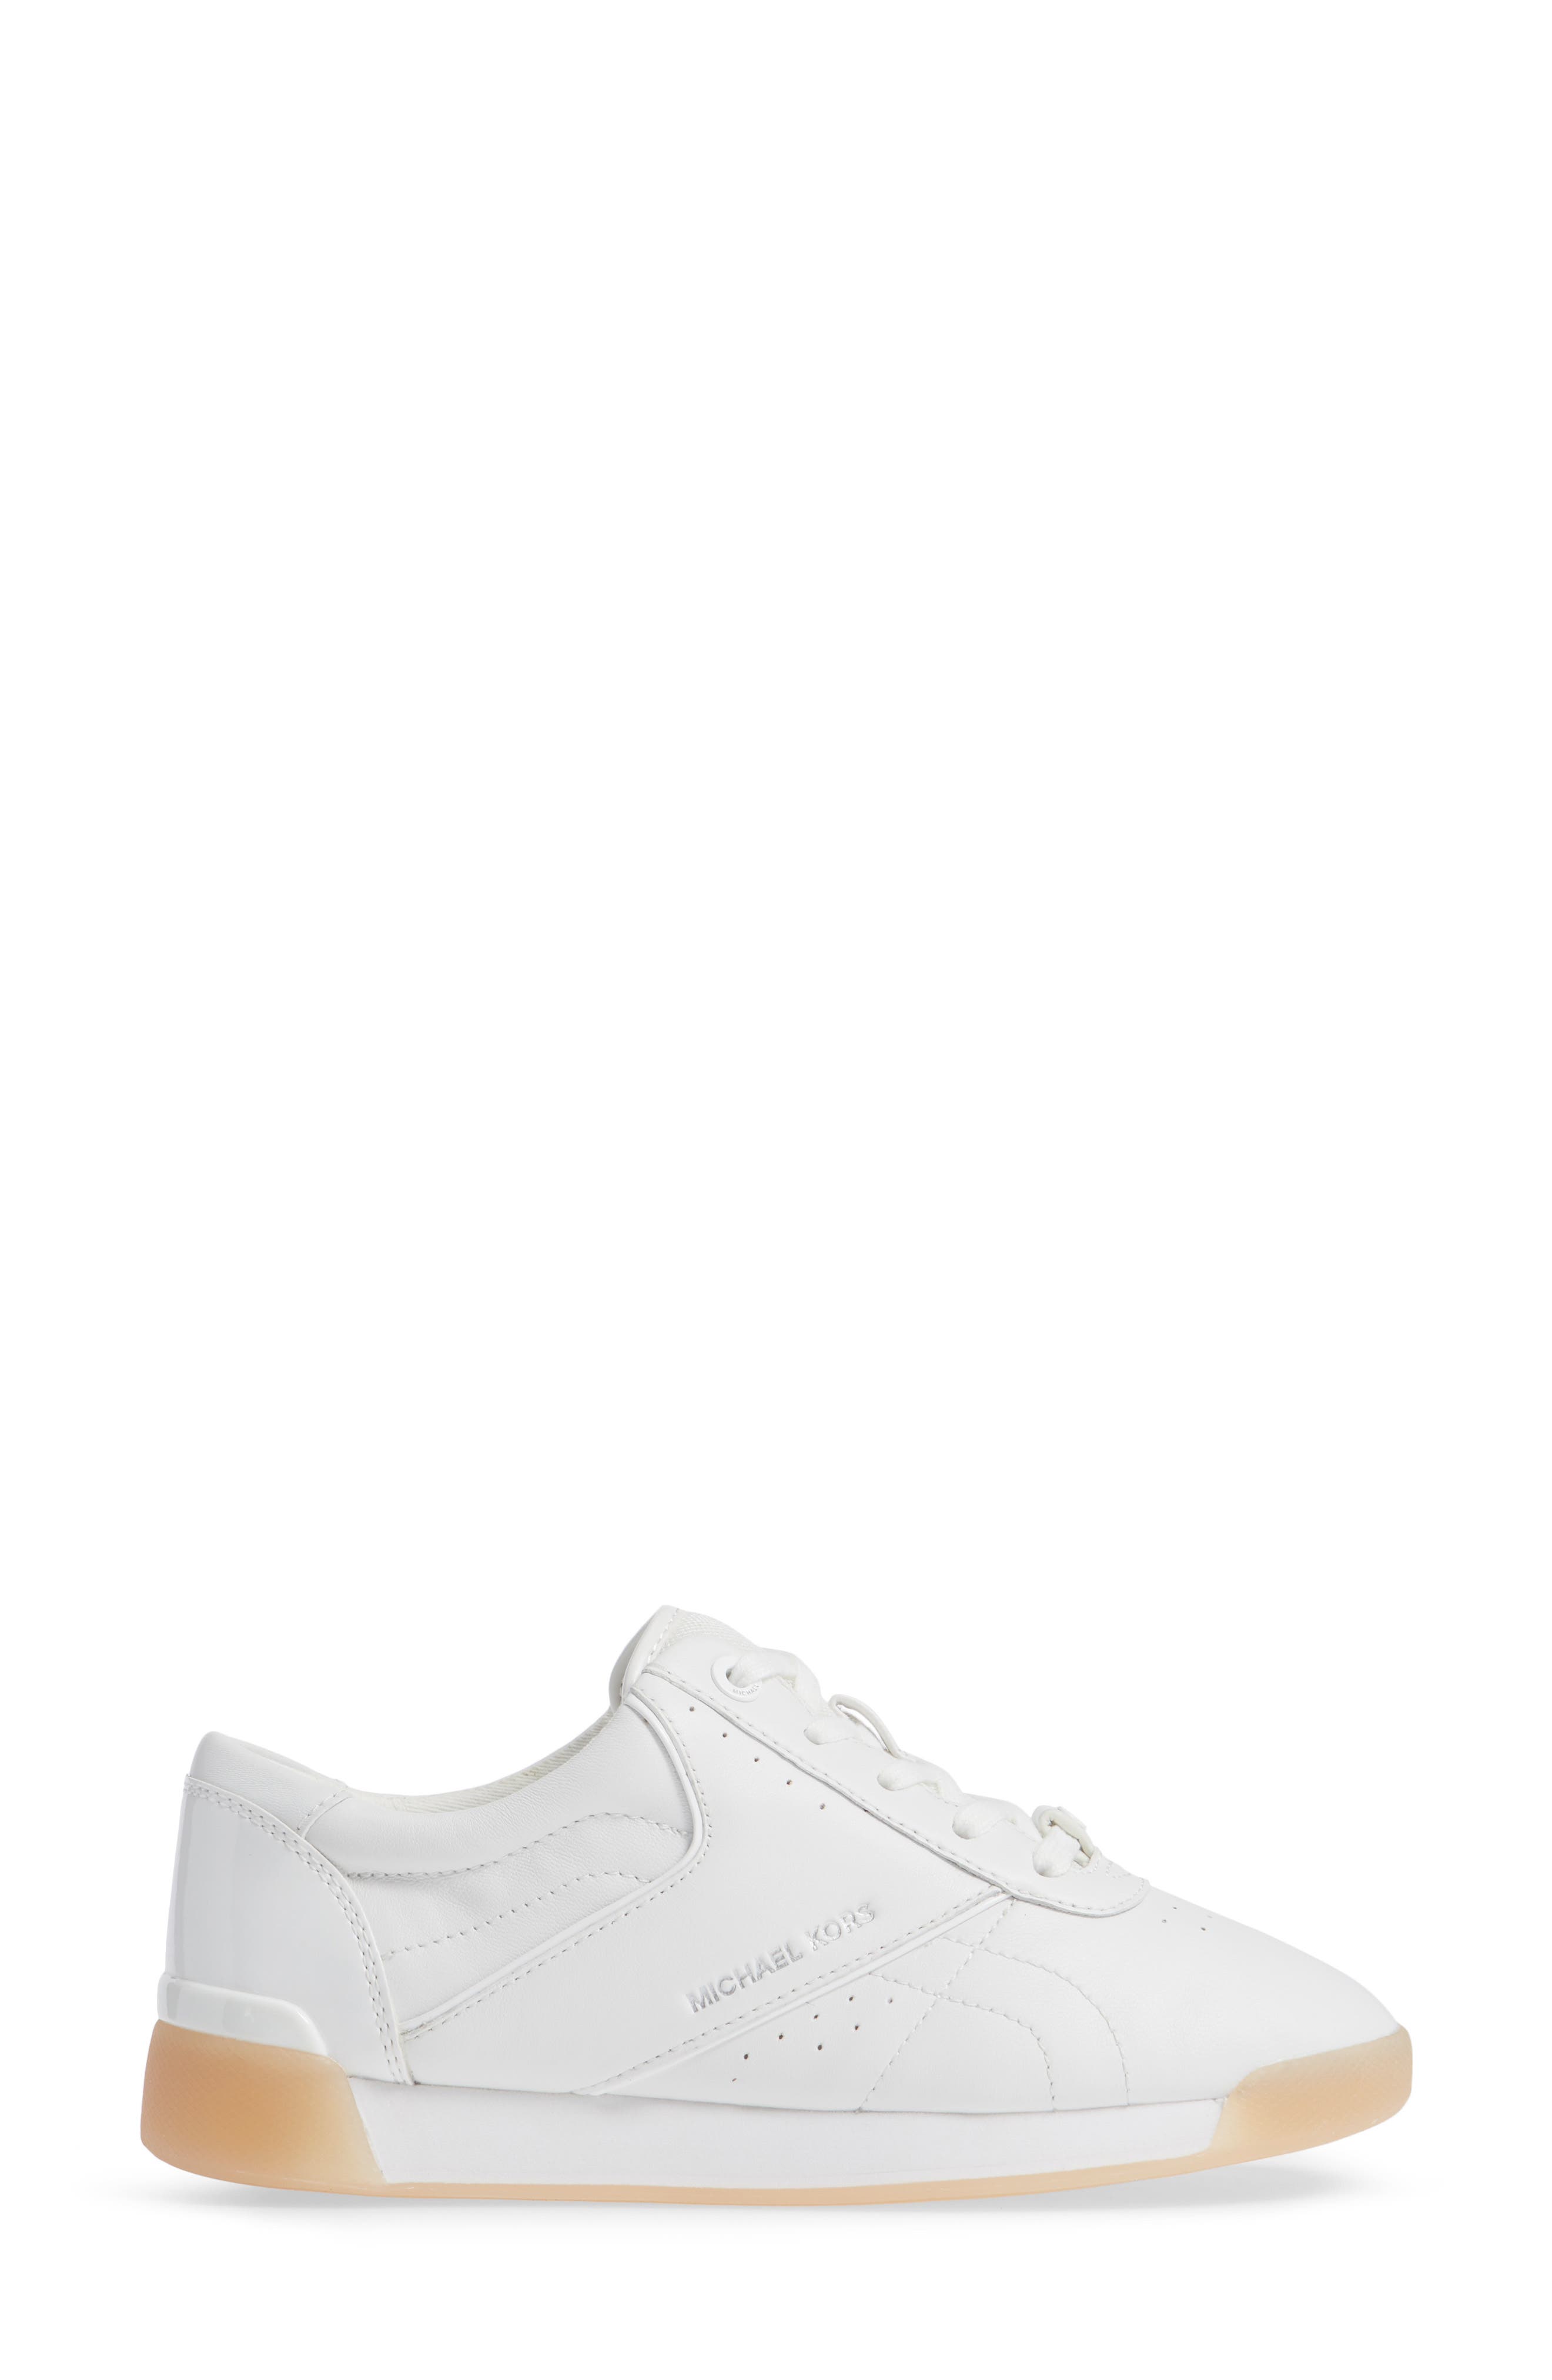 michael kors addie lace up sneakers